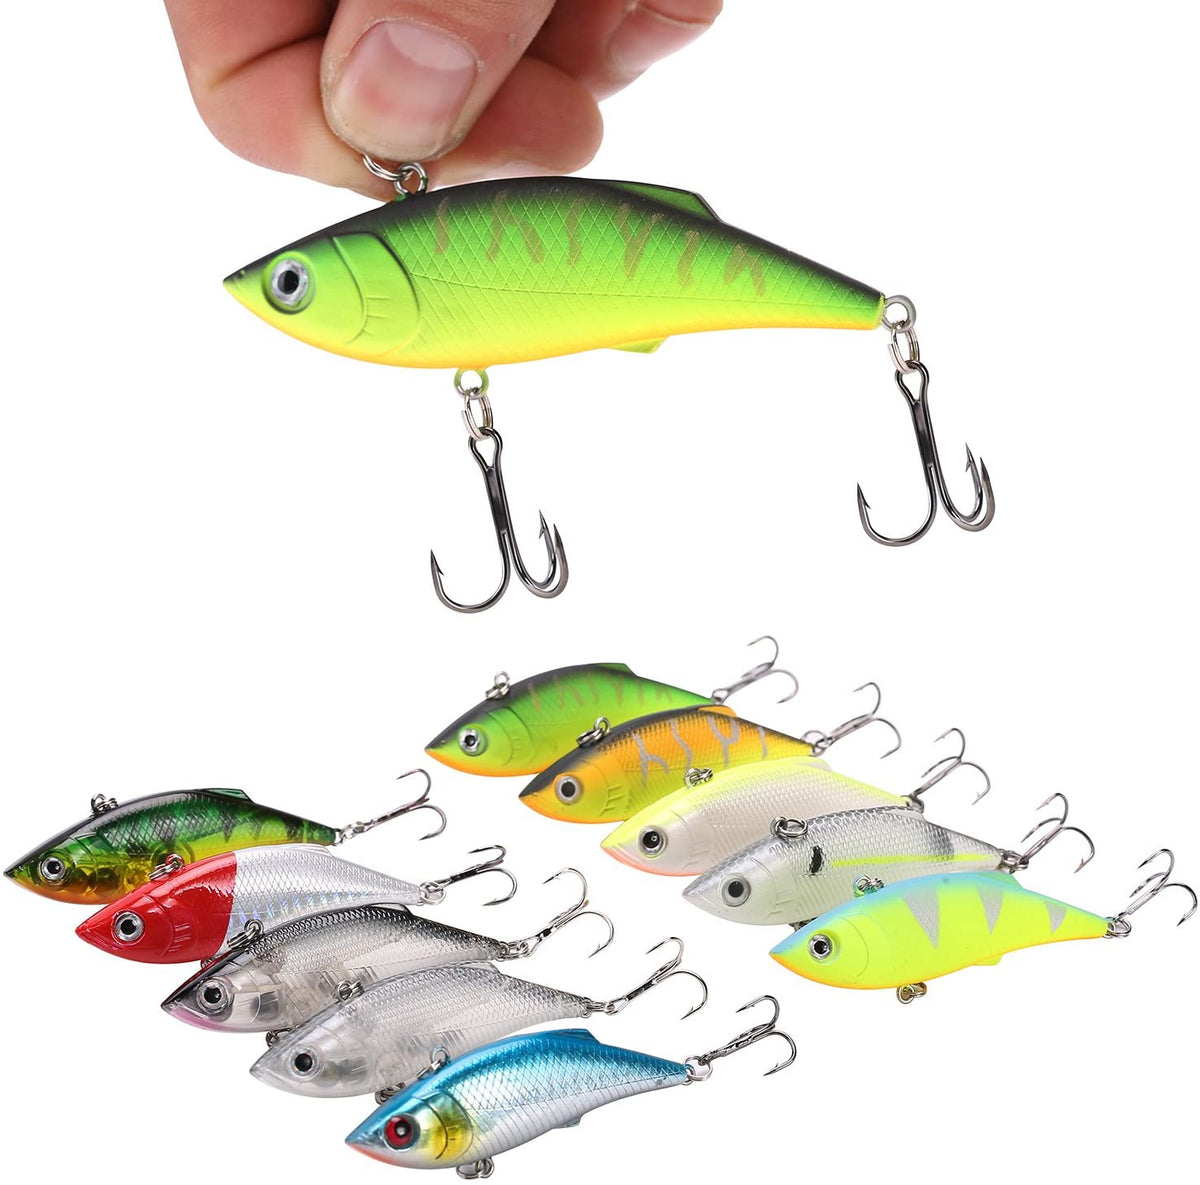 Donql Fishing Lure Set Minnow Baits Kit Wobbler Crankbaits with Hooks Hard  Popper Lures for Saltwater Freshwater Trout Bass Salmon Fishing